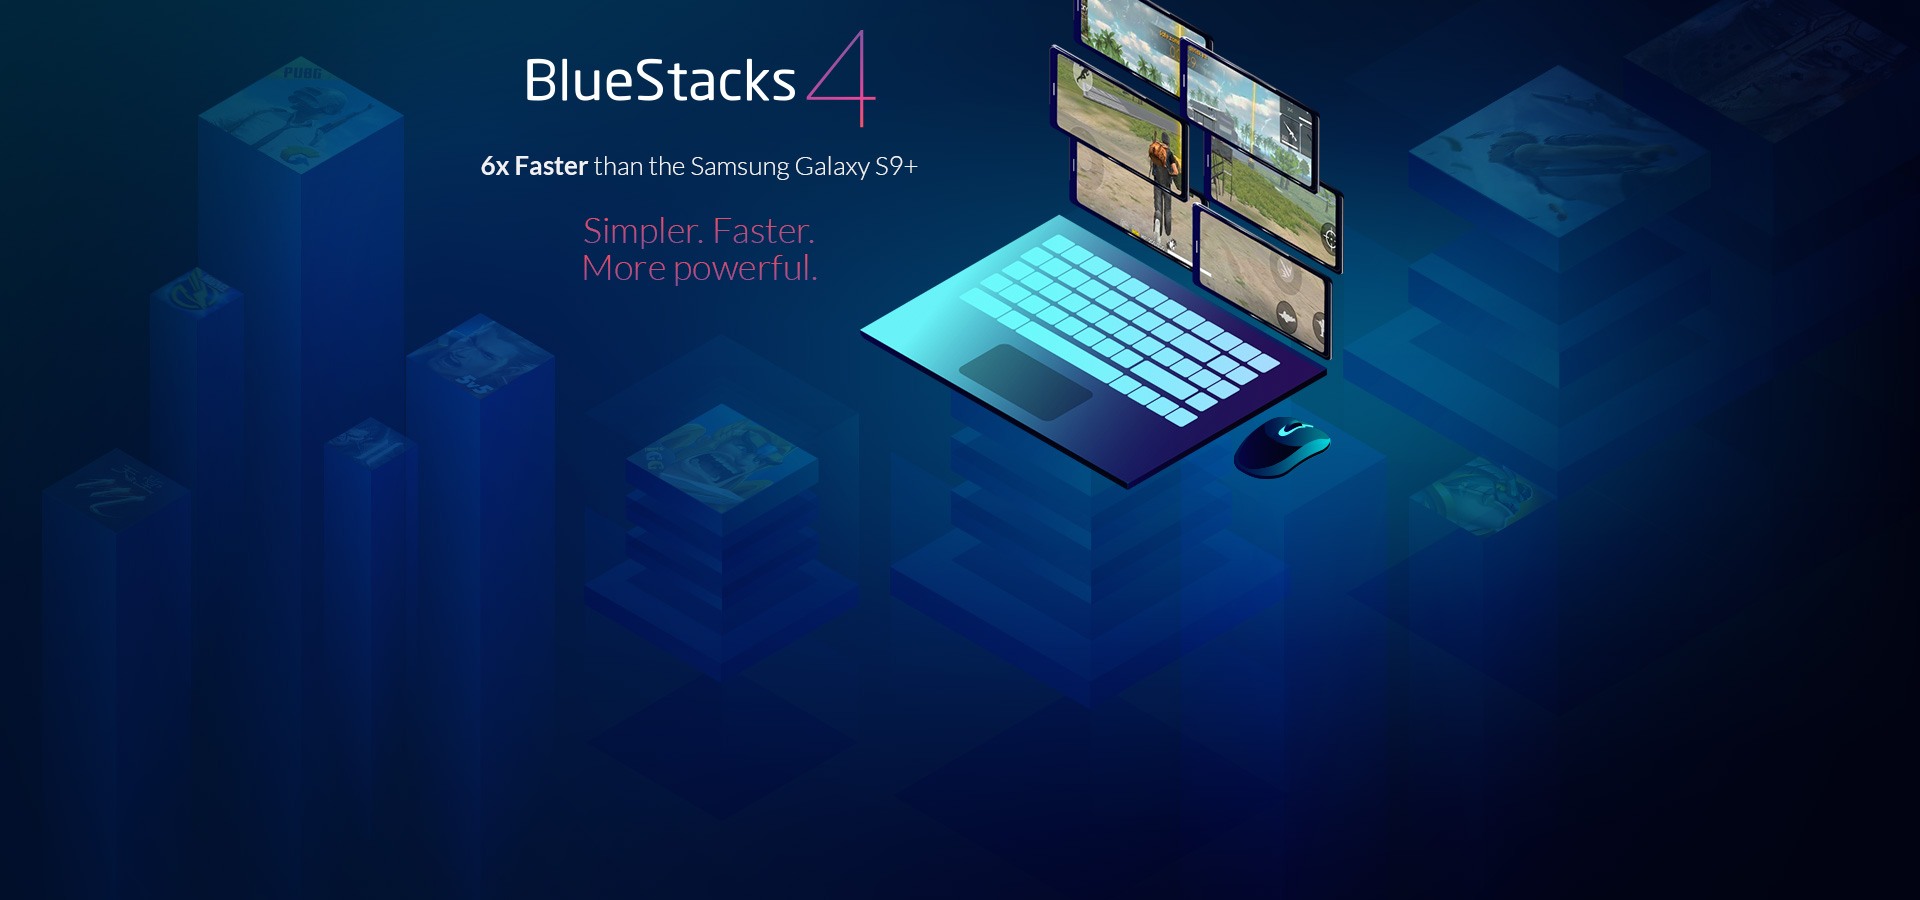 bluestacks play store waiting for download